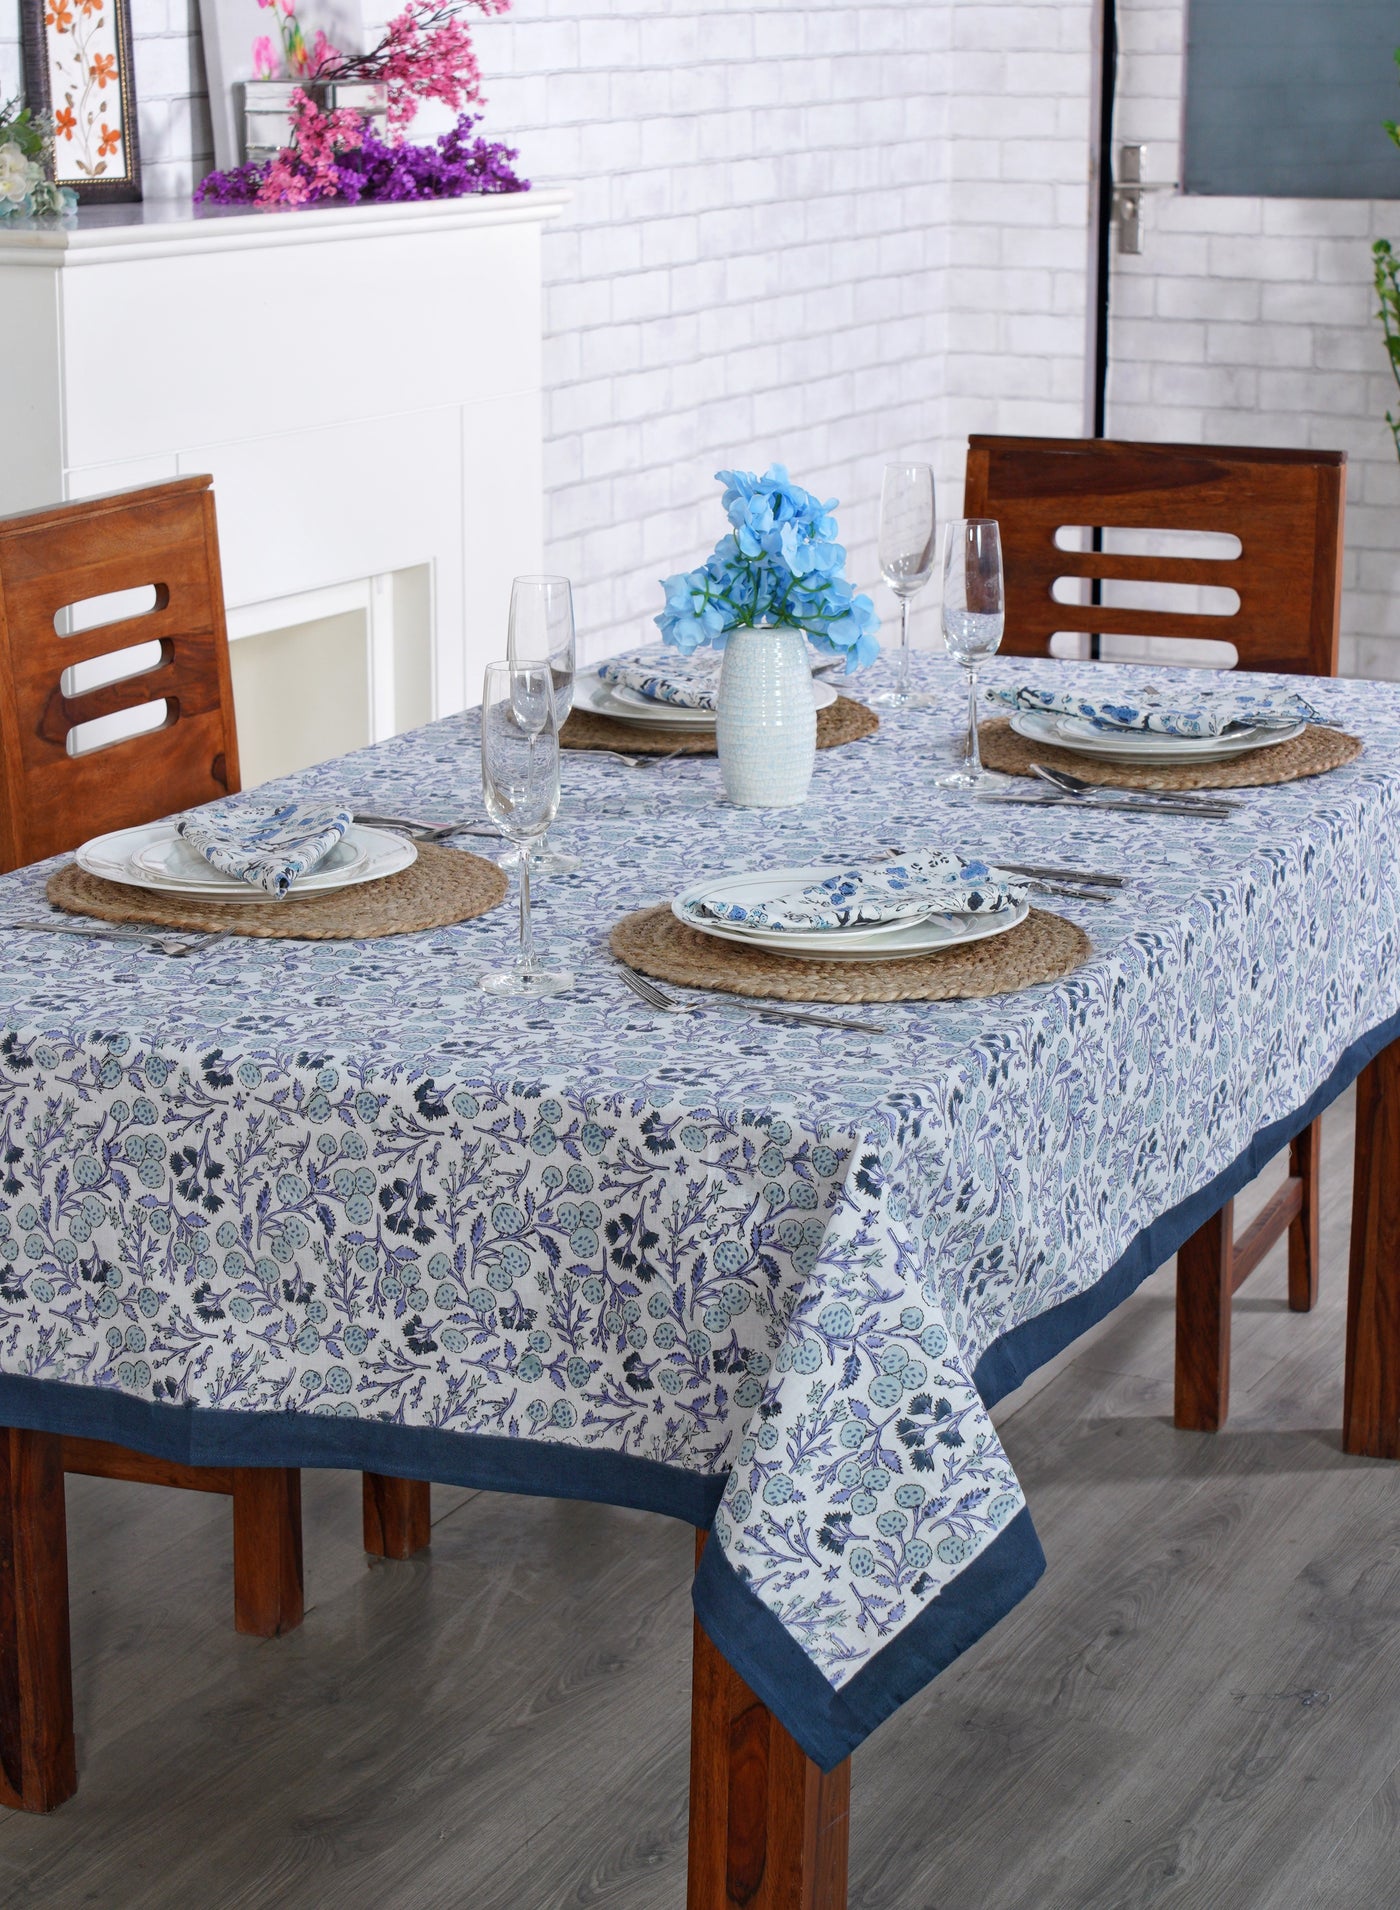 Fabricrush Denim and Baby Blue Indian Handicraft Block Printing 100% Pure Cotton Border Design Tablecloth And  Table Cover